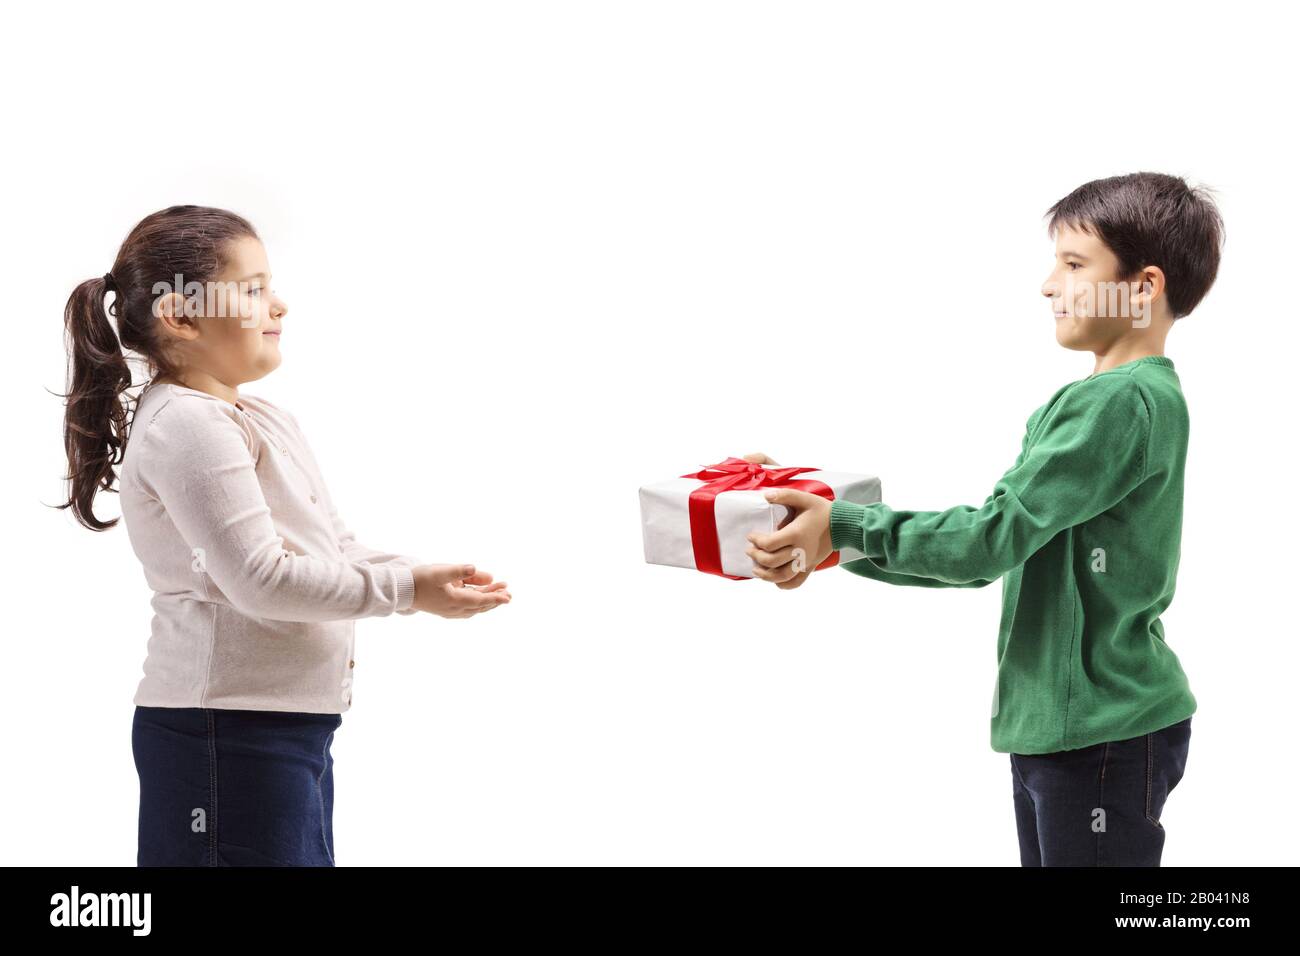 Boy giving a present to a girl isolated on white background Stock Photo